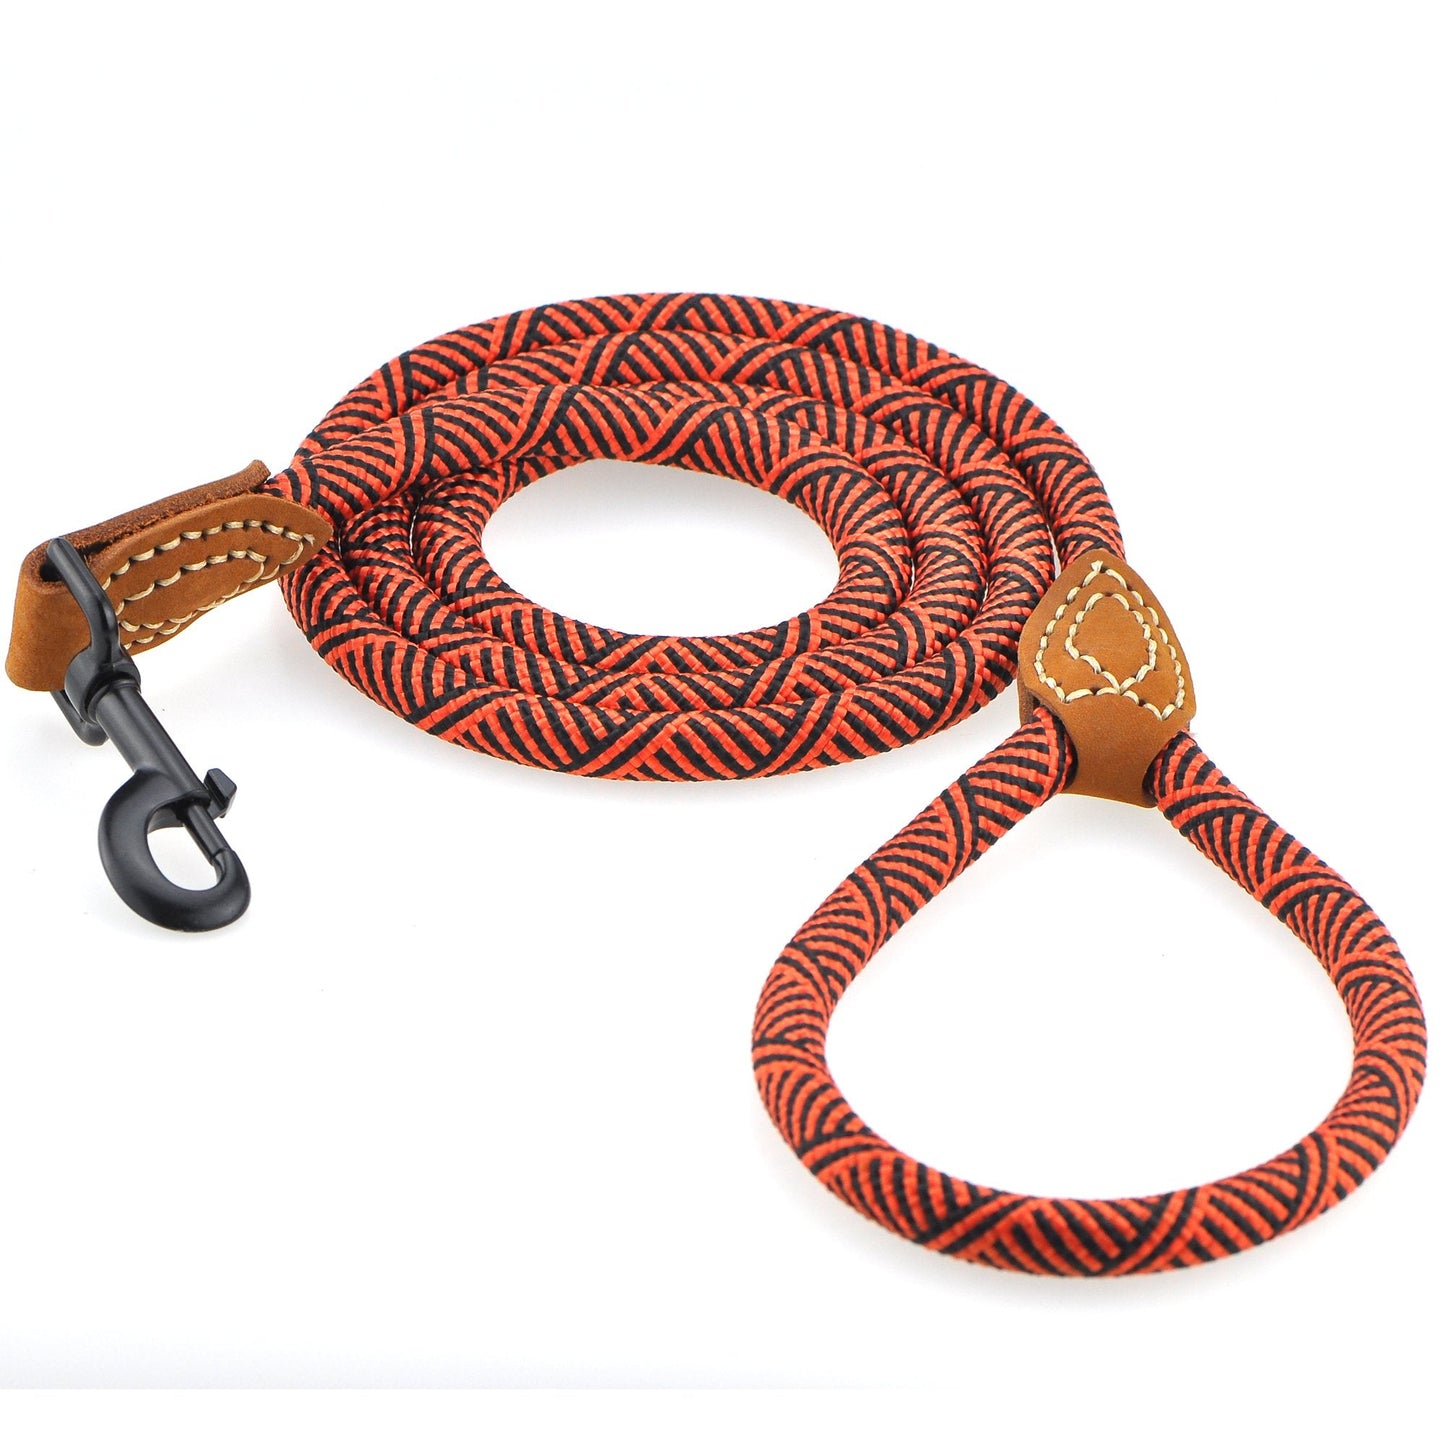 Mile High Life | Mountain Climbing Dog Rope Leash with Heavy Duty Metal Sturdy Clasp | Genuine Leather Tailored Connection with Strong Stitches (White, 48 Inch (Pack of 1))